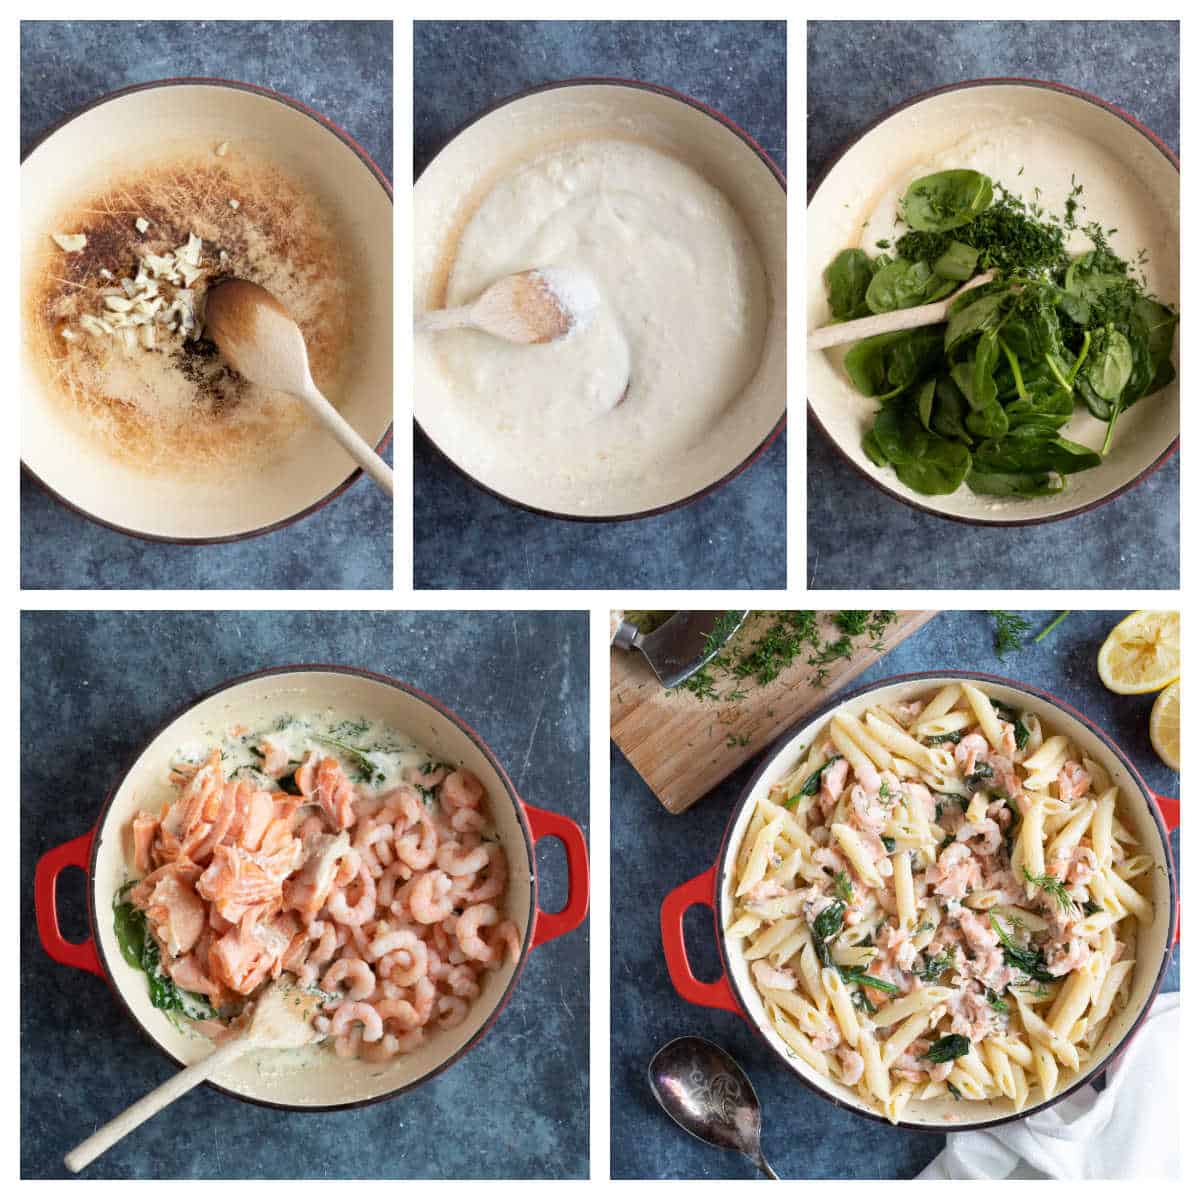 Step by step photo instructions for making creamy prawn and salmon pasta.